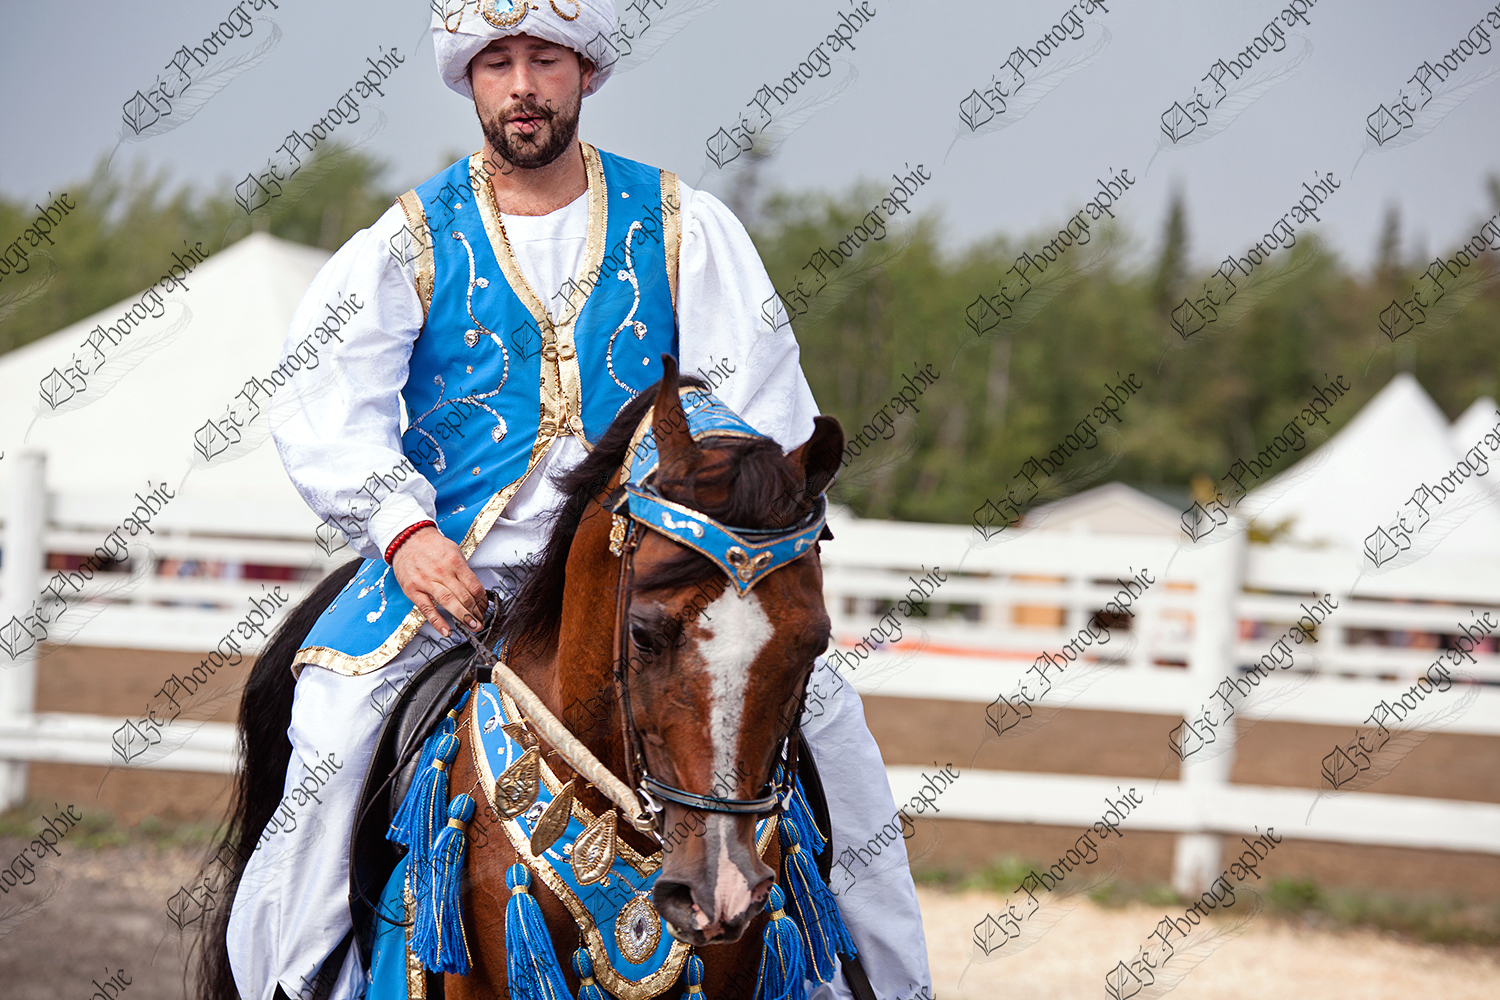 elze_photo_7149_spectacle_cheval_costume_arabian_horse_in_costume